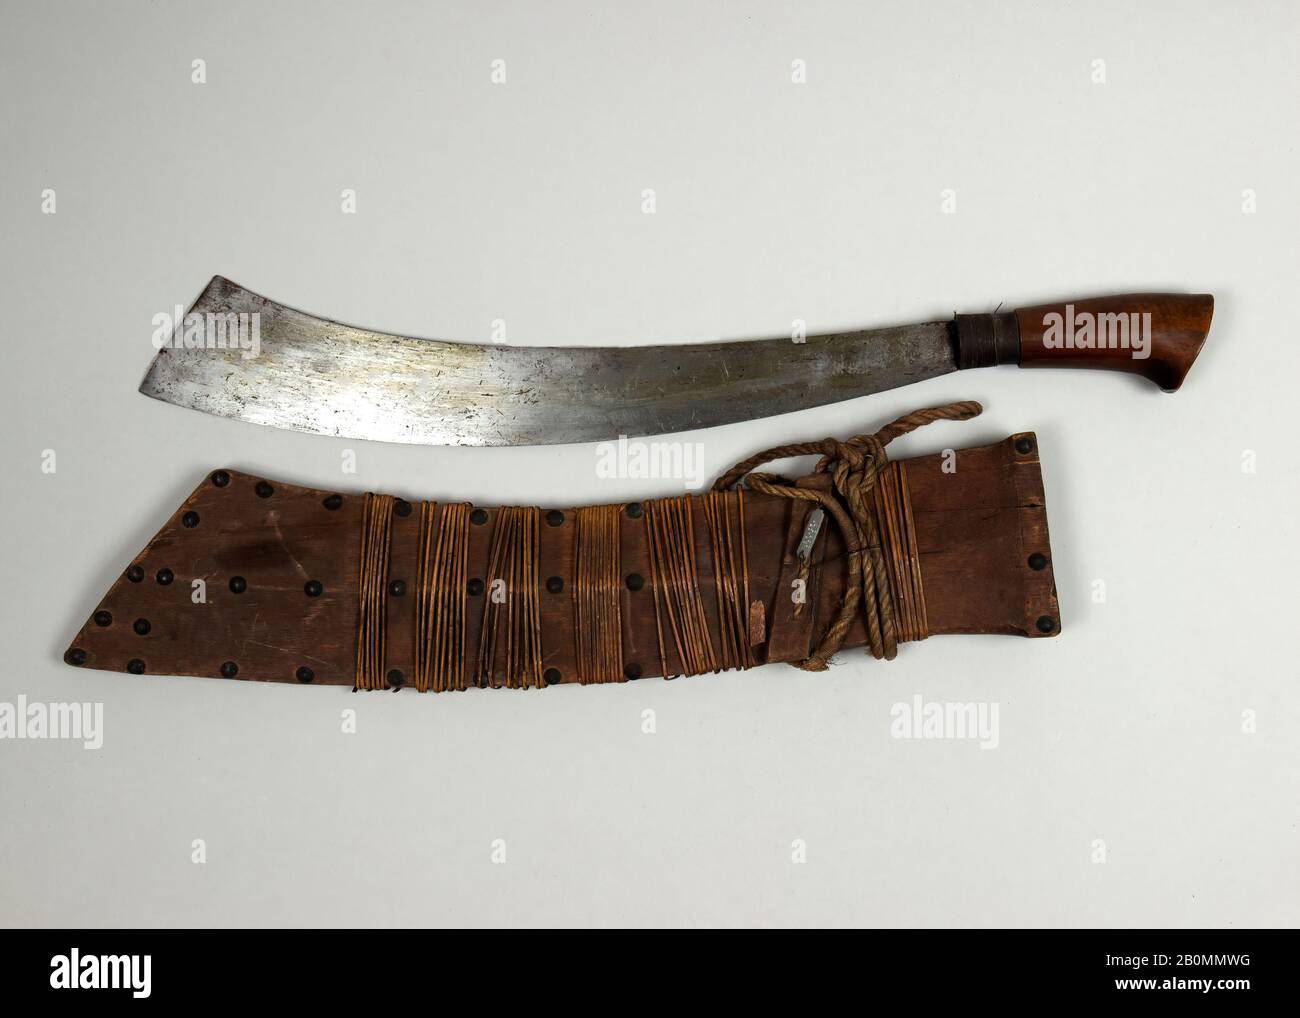 Jungle Knife with Sheath, Philippine, Yakan, 18th–19th century, Basilan, Philippine, Yakan, Steel, wood, brass, cane (rattan), L. with sheath 25 1/2 in. (64.8 cm); L. without sheath 22 1/4 in. (56.5 cm); L. of blade 17 1/8 in. (43.5 cm); W. 2 in. (5.1 cm); Wt. 1 lb. 13.6 oz. (839.1 g); Wt. of sheath 10.9 oz. (309 g), Knives Stock Photo